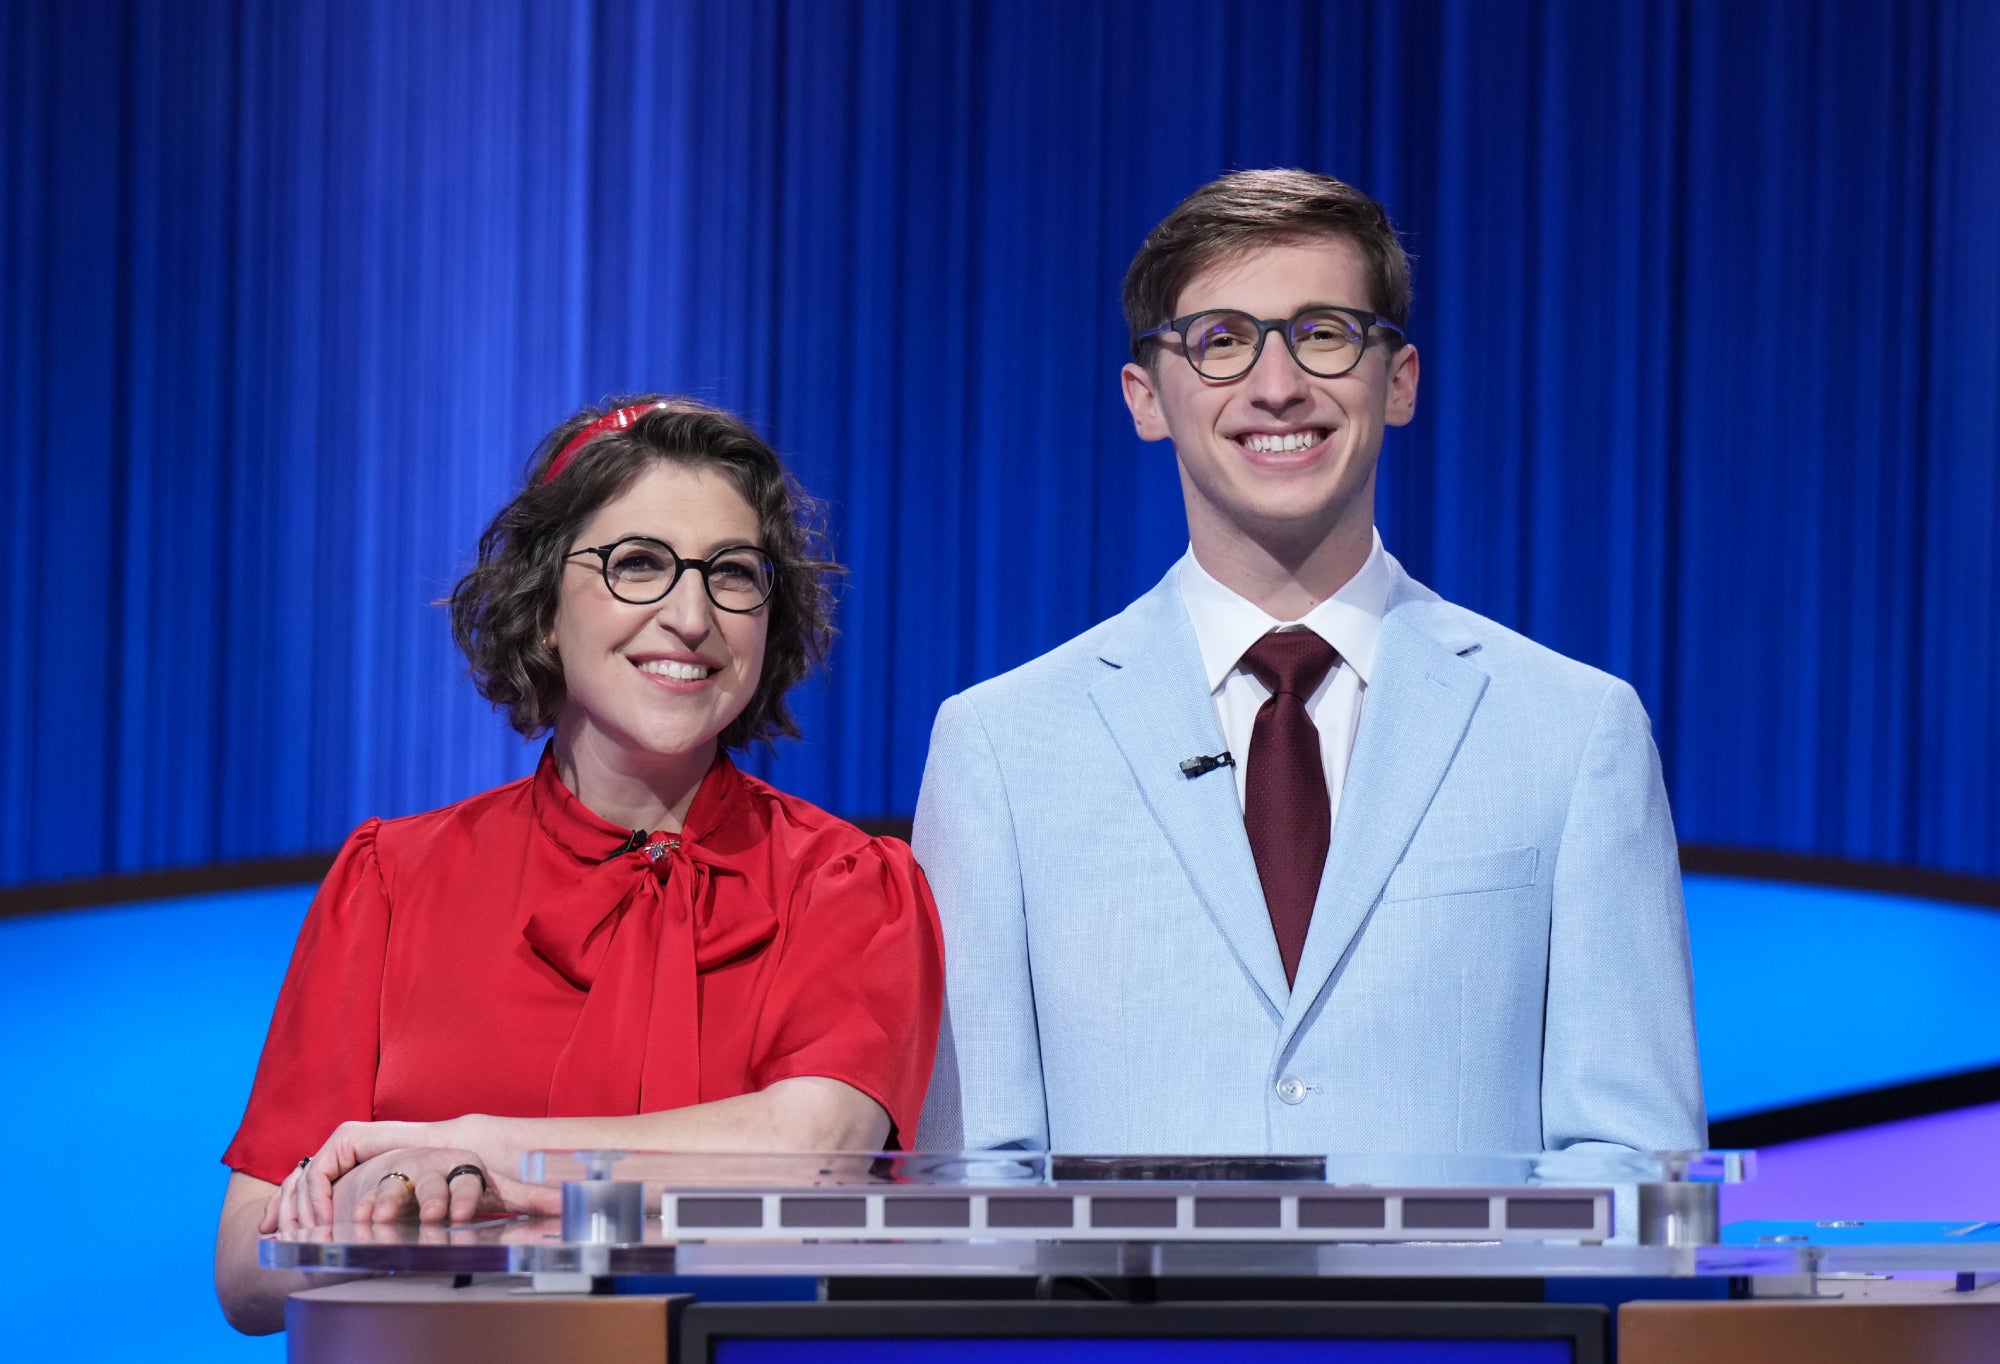 Jeopardy! host Mayim Bialik wearing red, on the left, standing next to this story's author, Jack Izzo, wearing light blue, on the right, both behind a Jeopardy! podium.